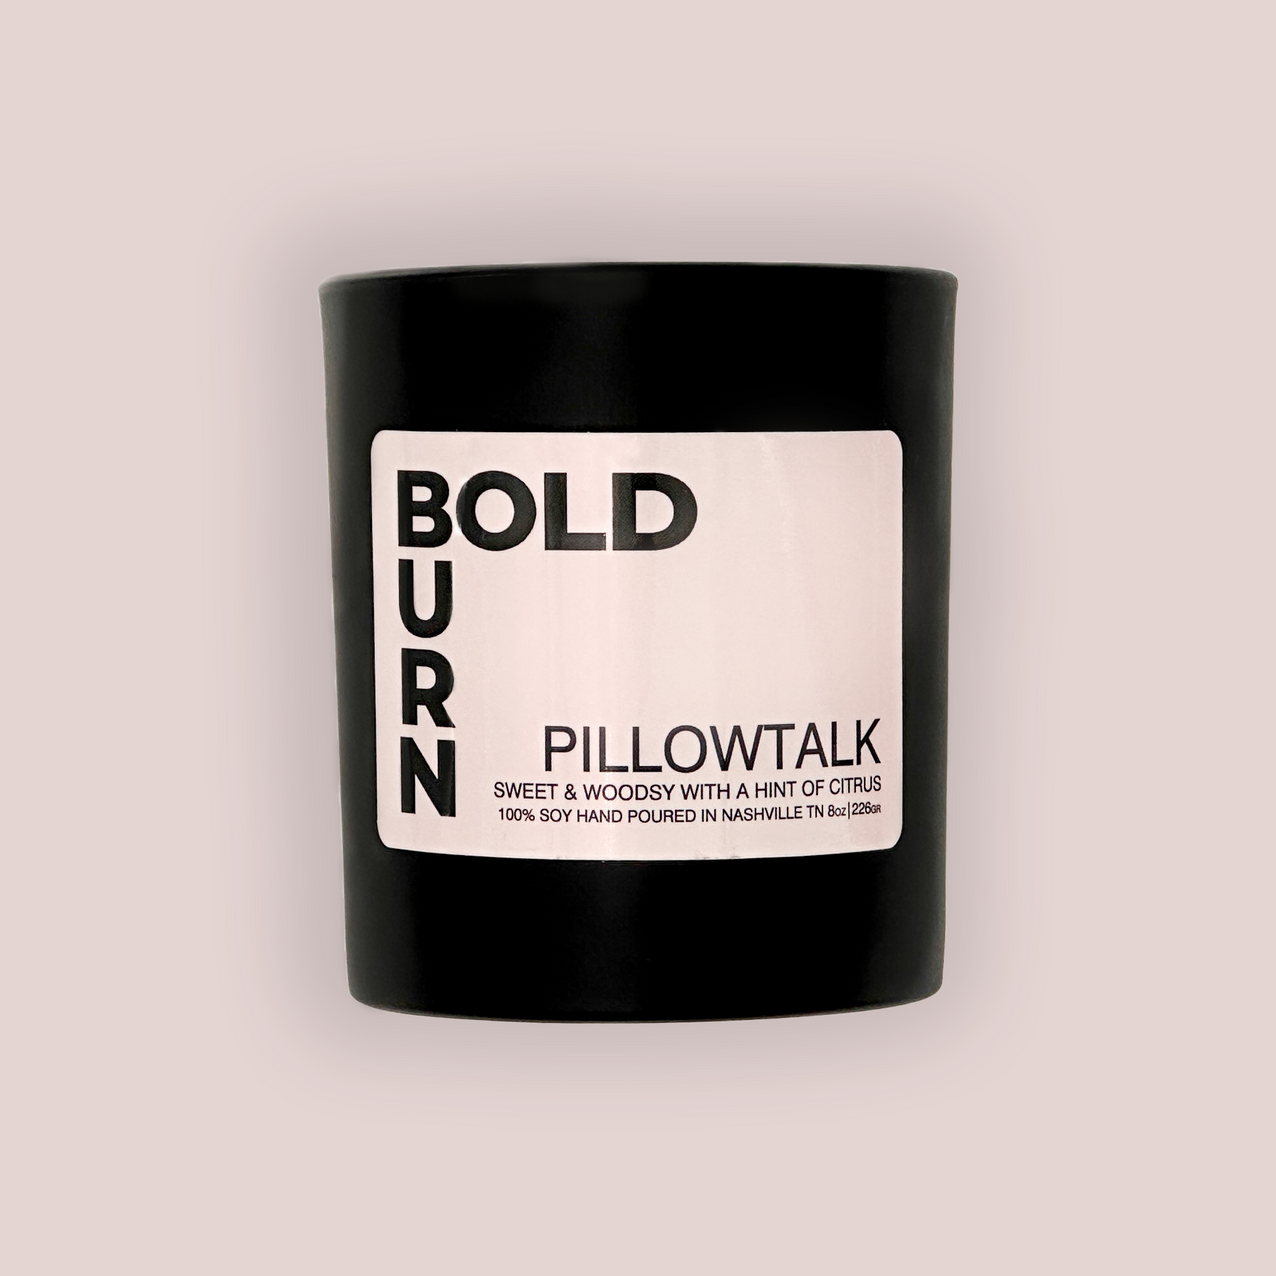 Two wick black candle with white label reading Bold Burn Pillowtalk: Sweet & Woodsy with a hint of Citrus on white background